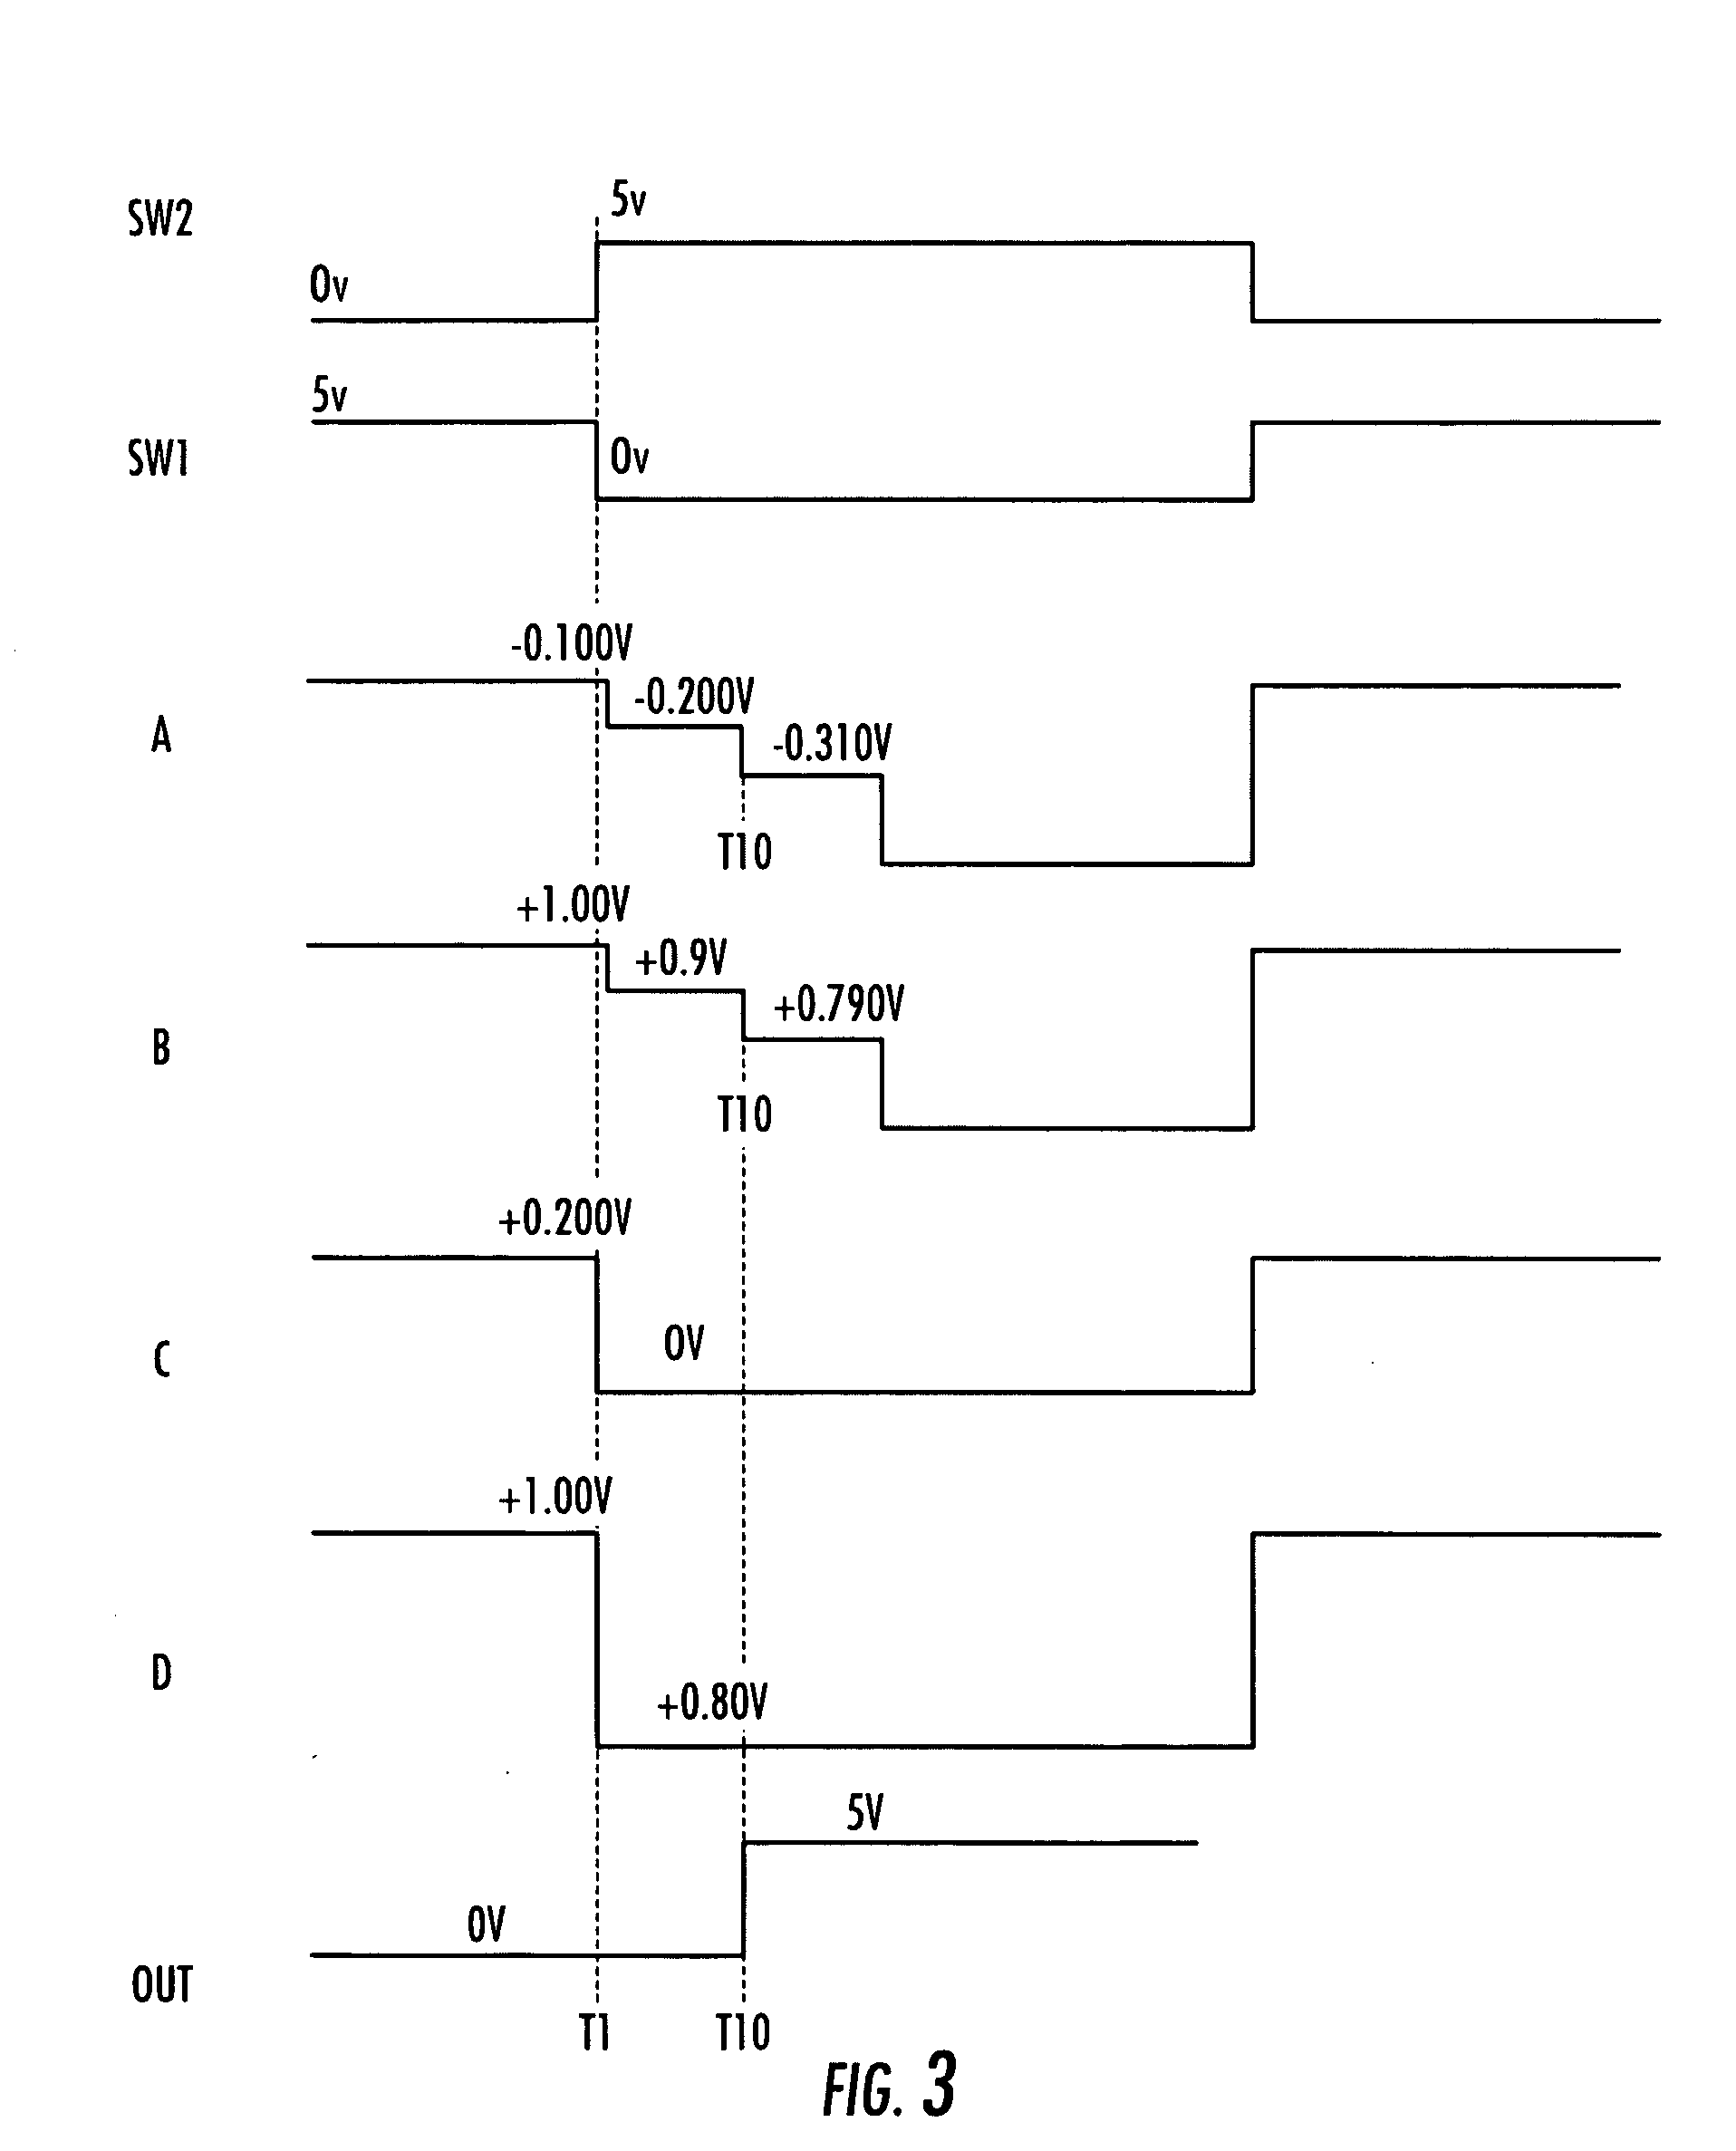 System and method of detecting phase body diode using a comparator in a synchronous rectified FET driver